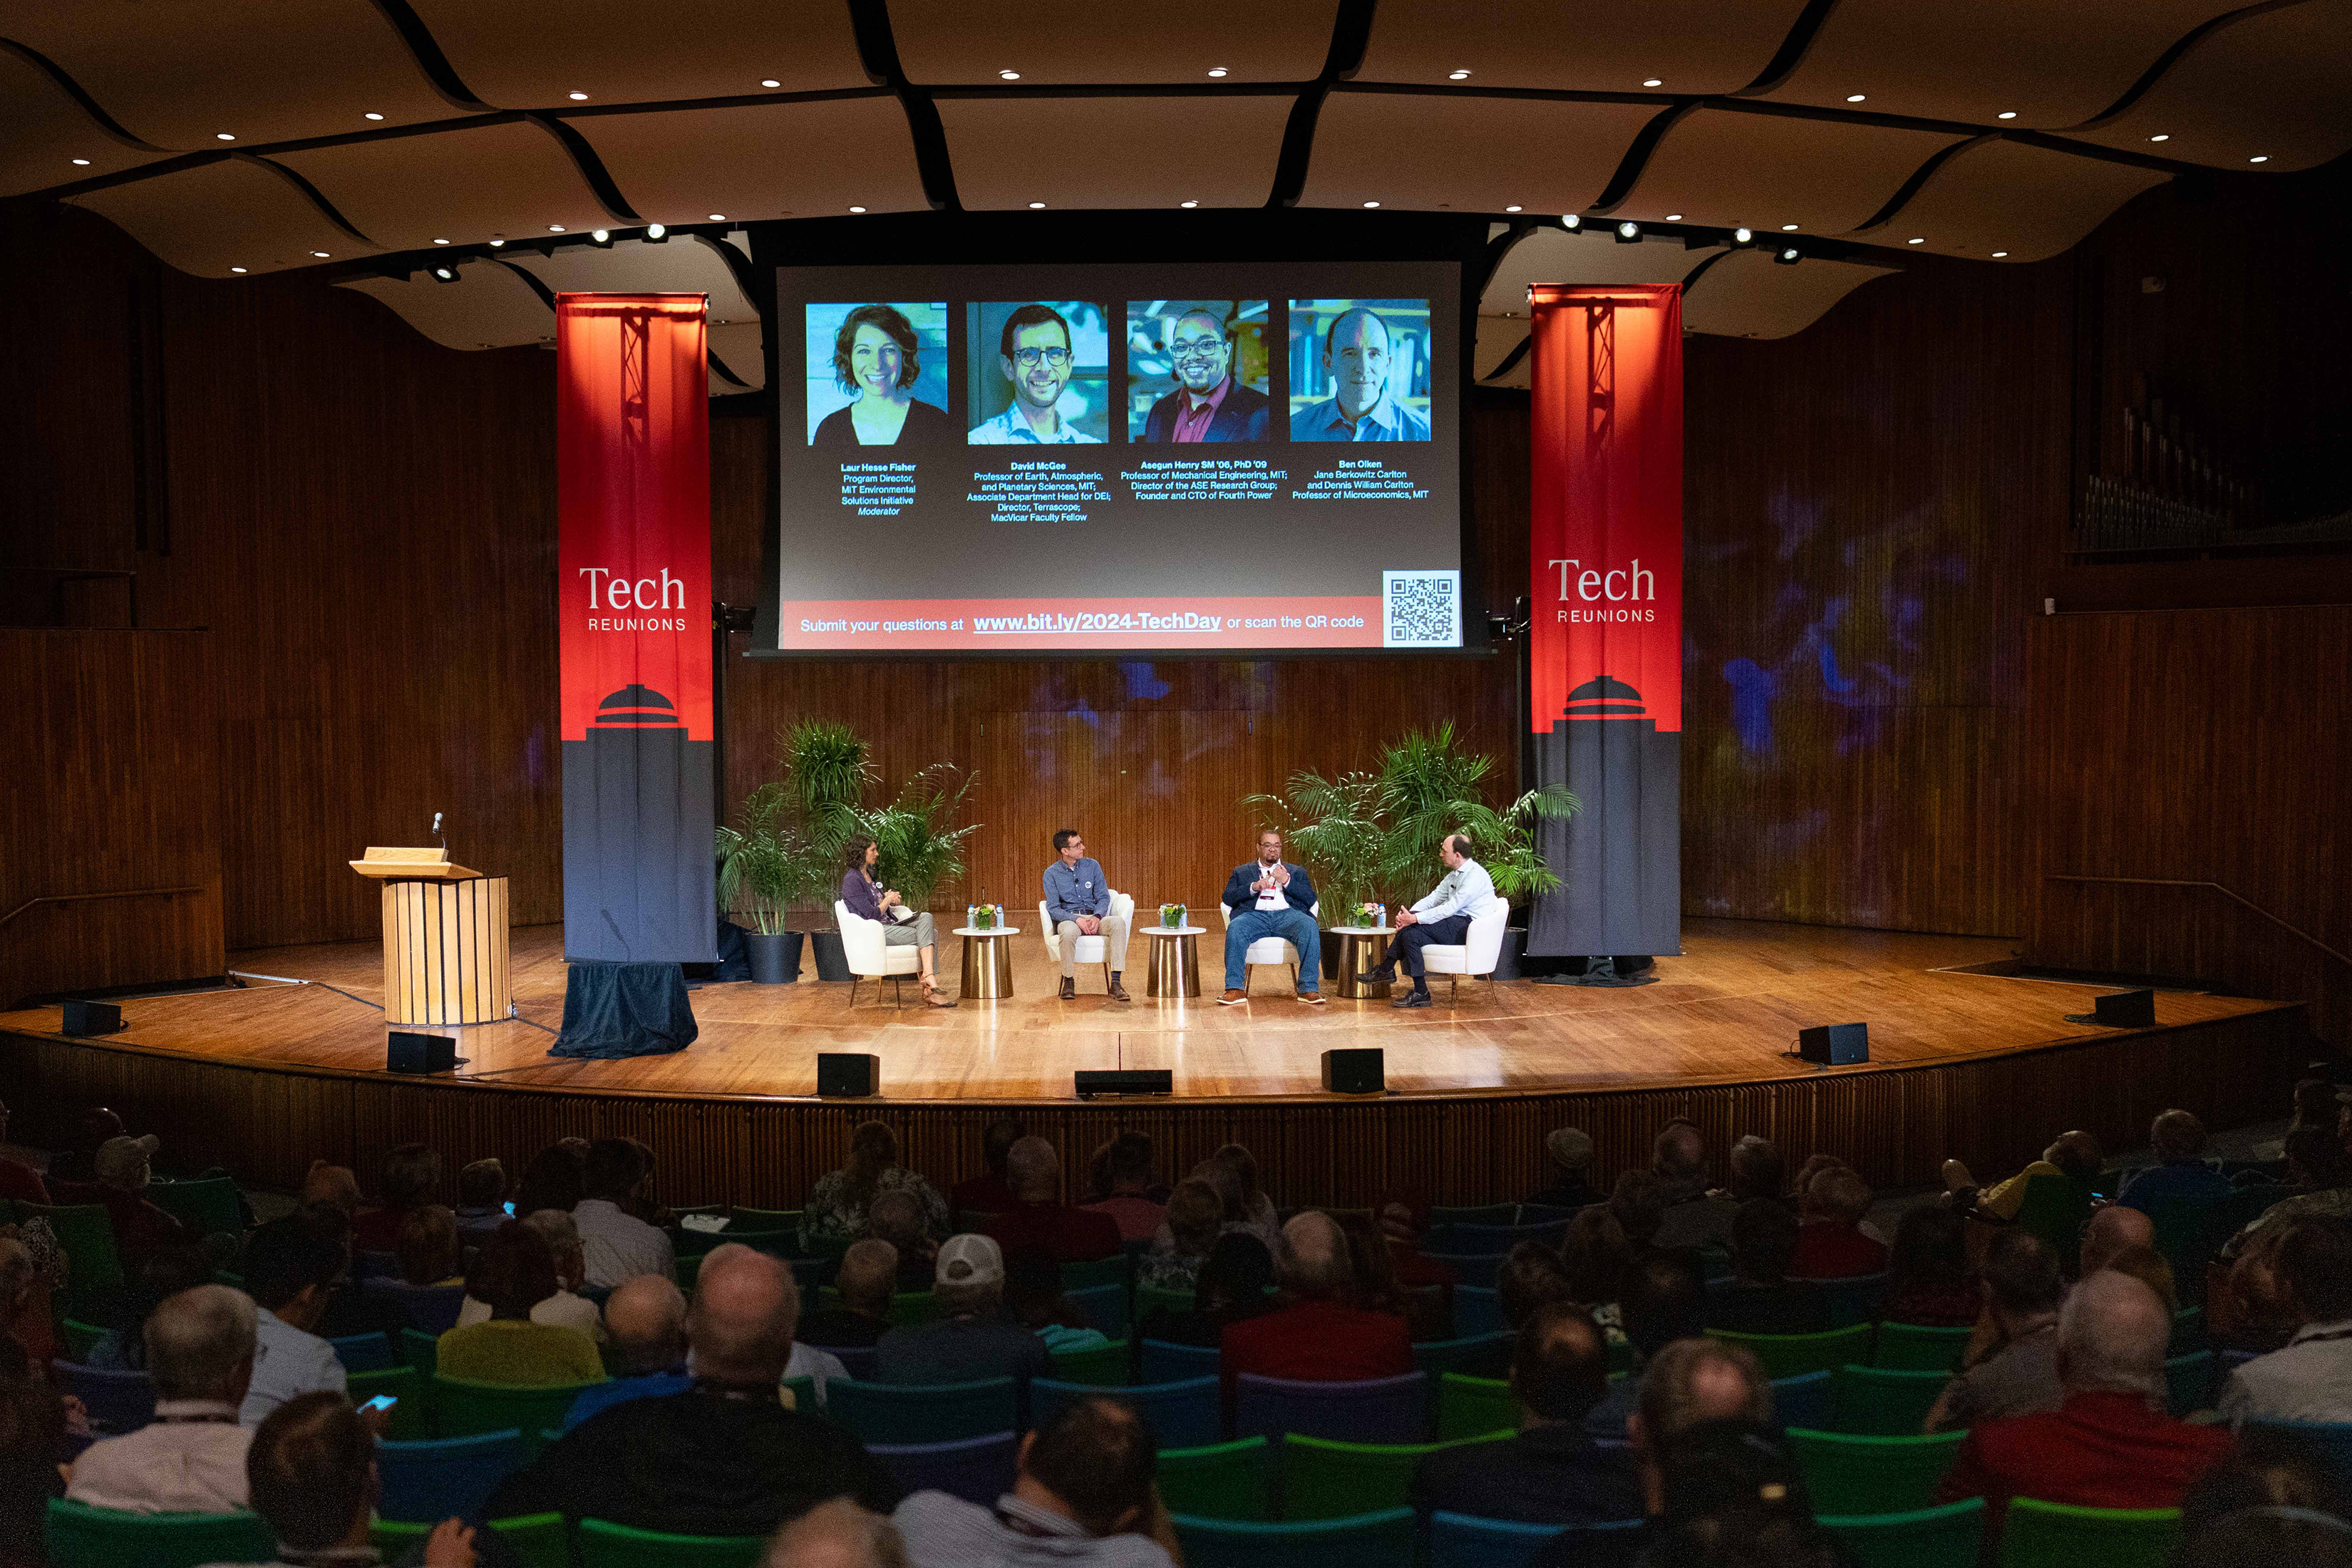 A view of a stage from the audience shows four people on stage. A large projection shows four headshots and the screen is framed by large red banners with the words Tech Reunions on them.